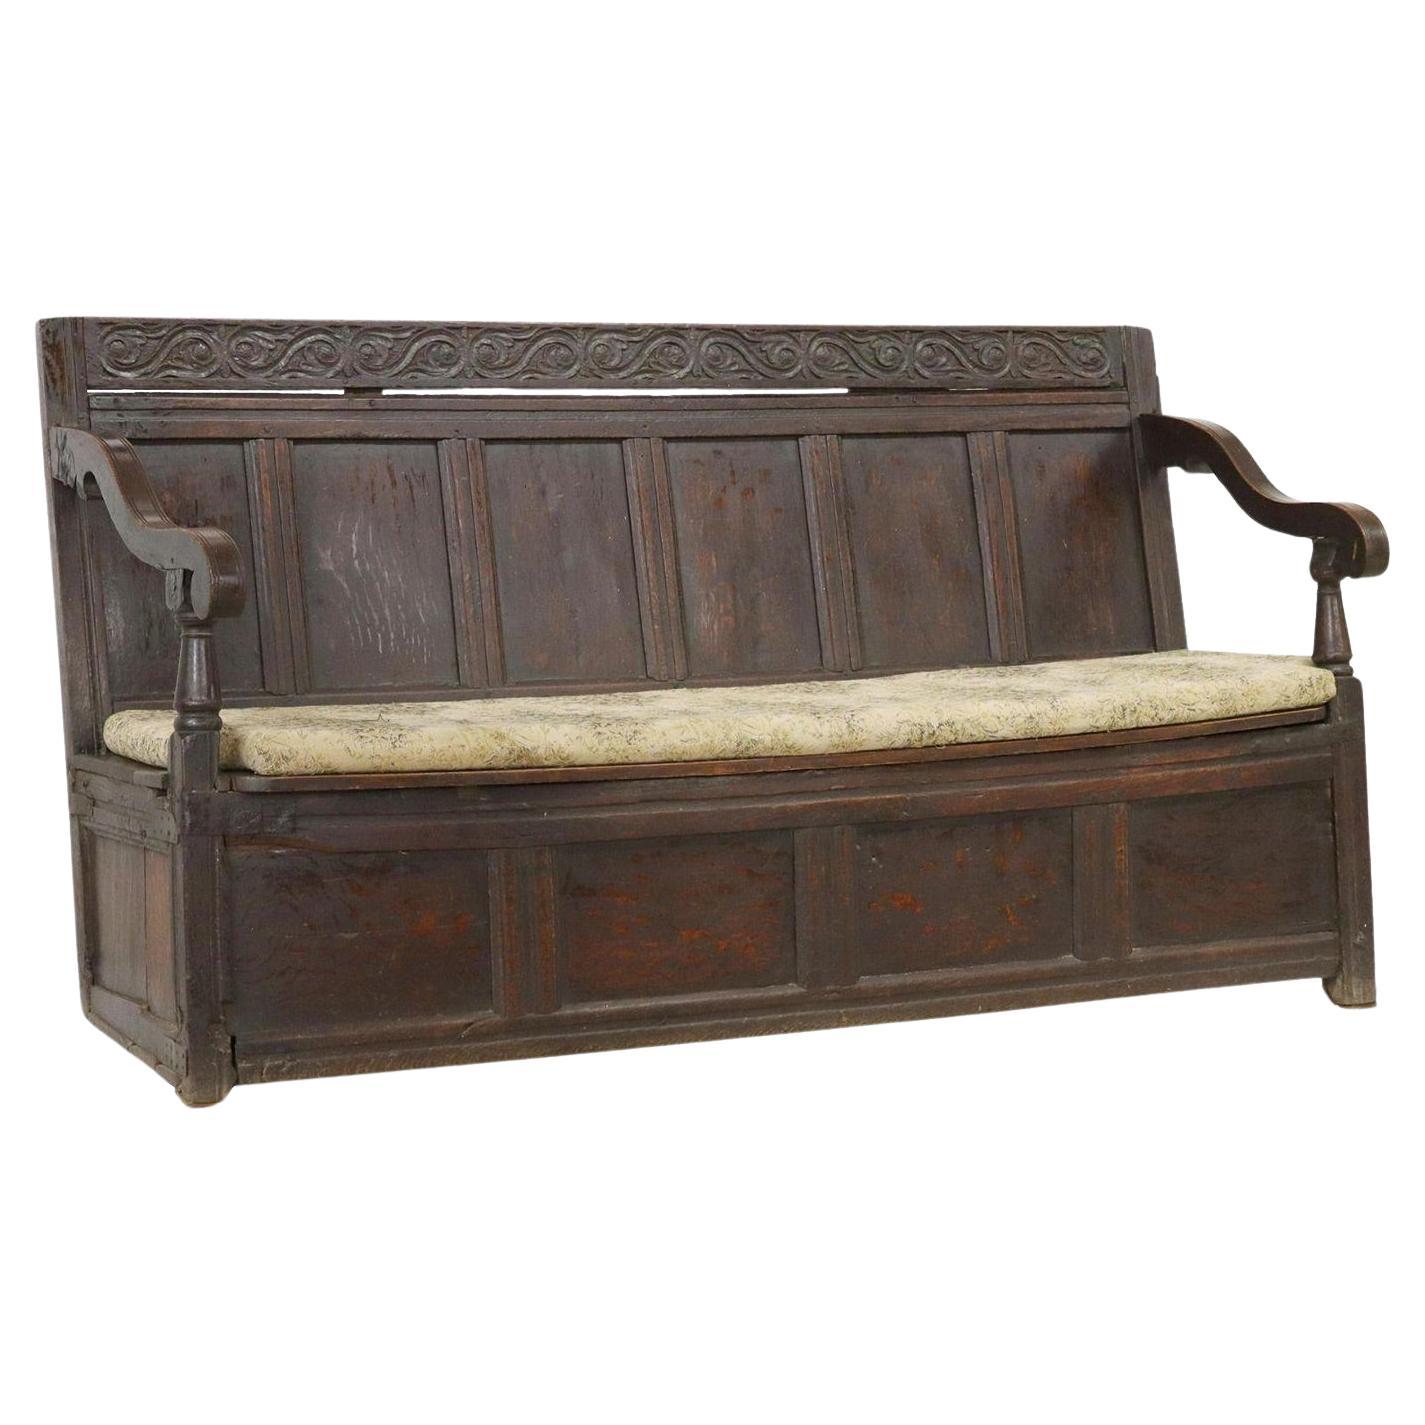 English Oak Hall Storage Settle Bench, 18th C. For Sale